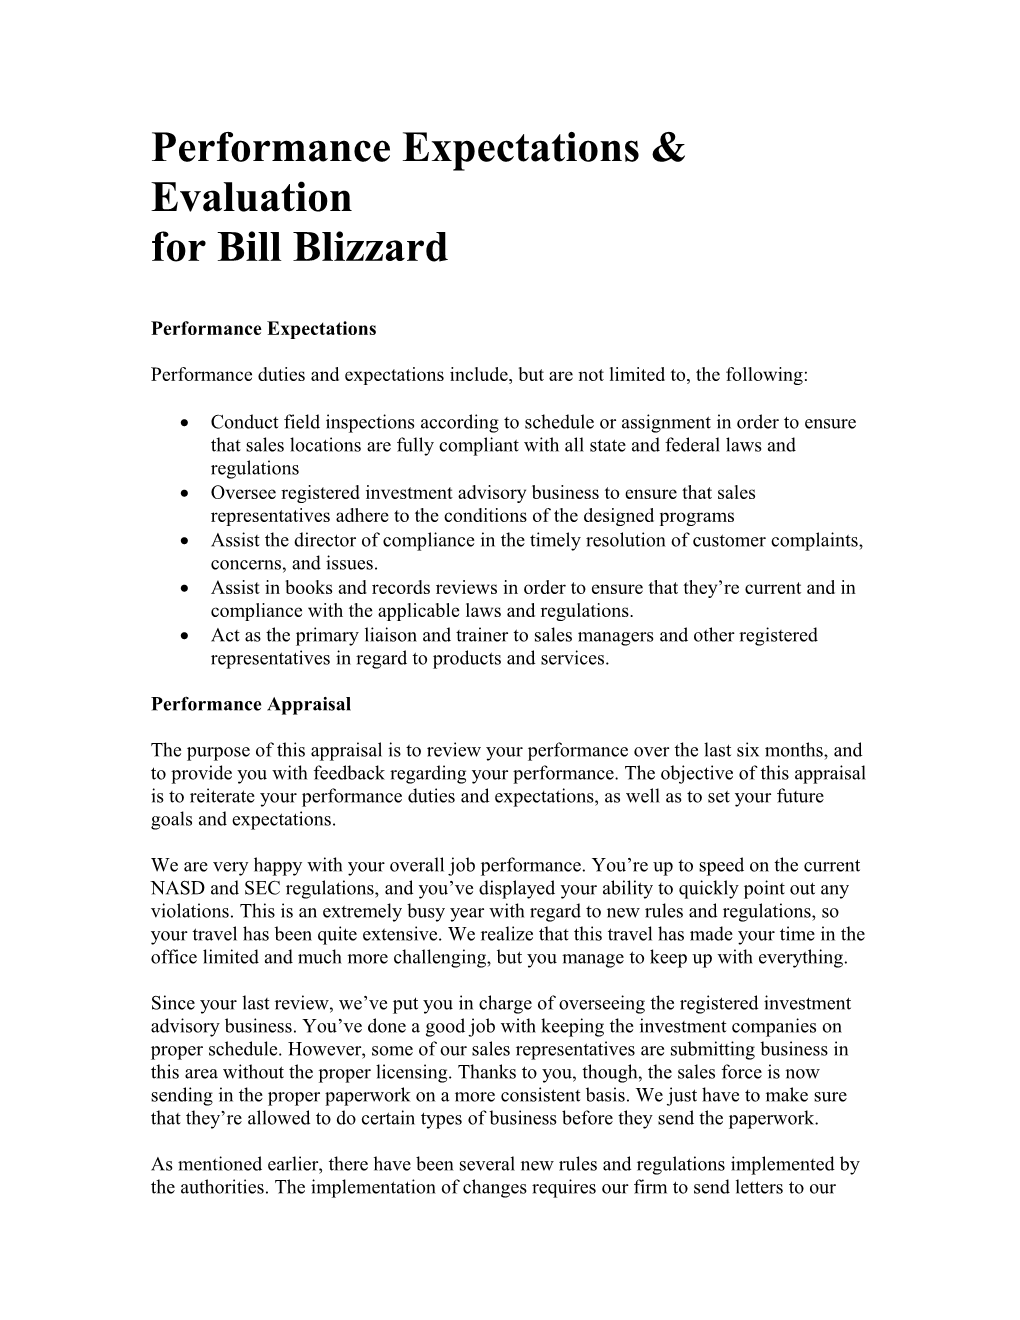 Performance Expectations & Evaluation